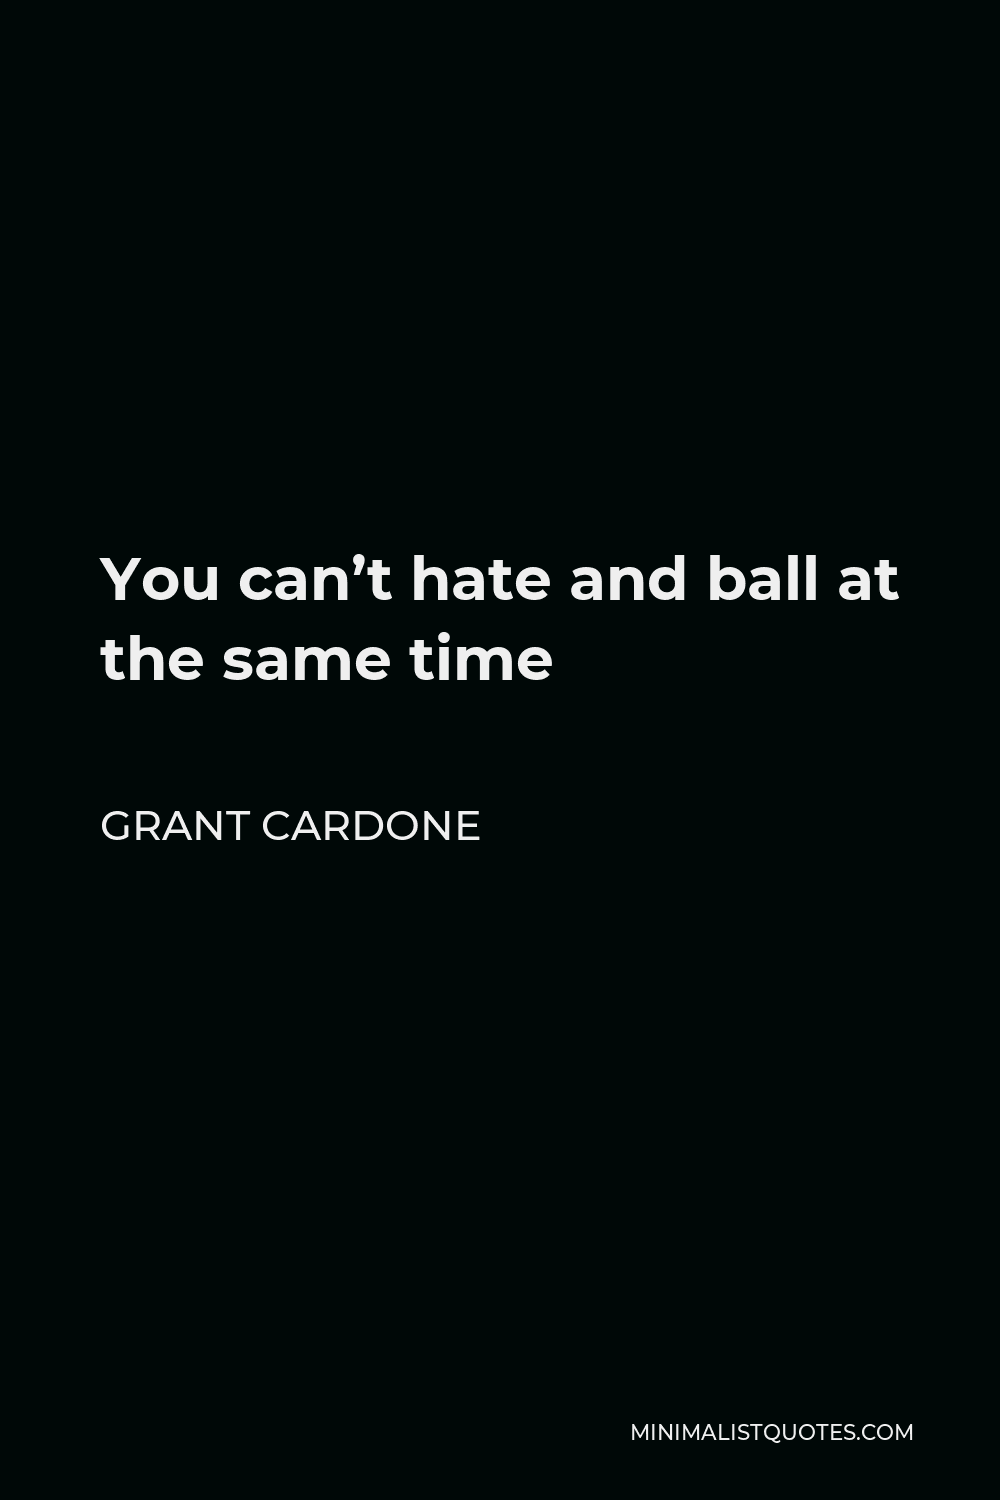 Grant Cardone Quote - You can’t hate and ball at the same time